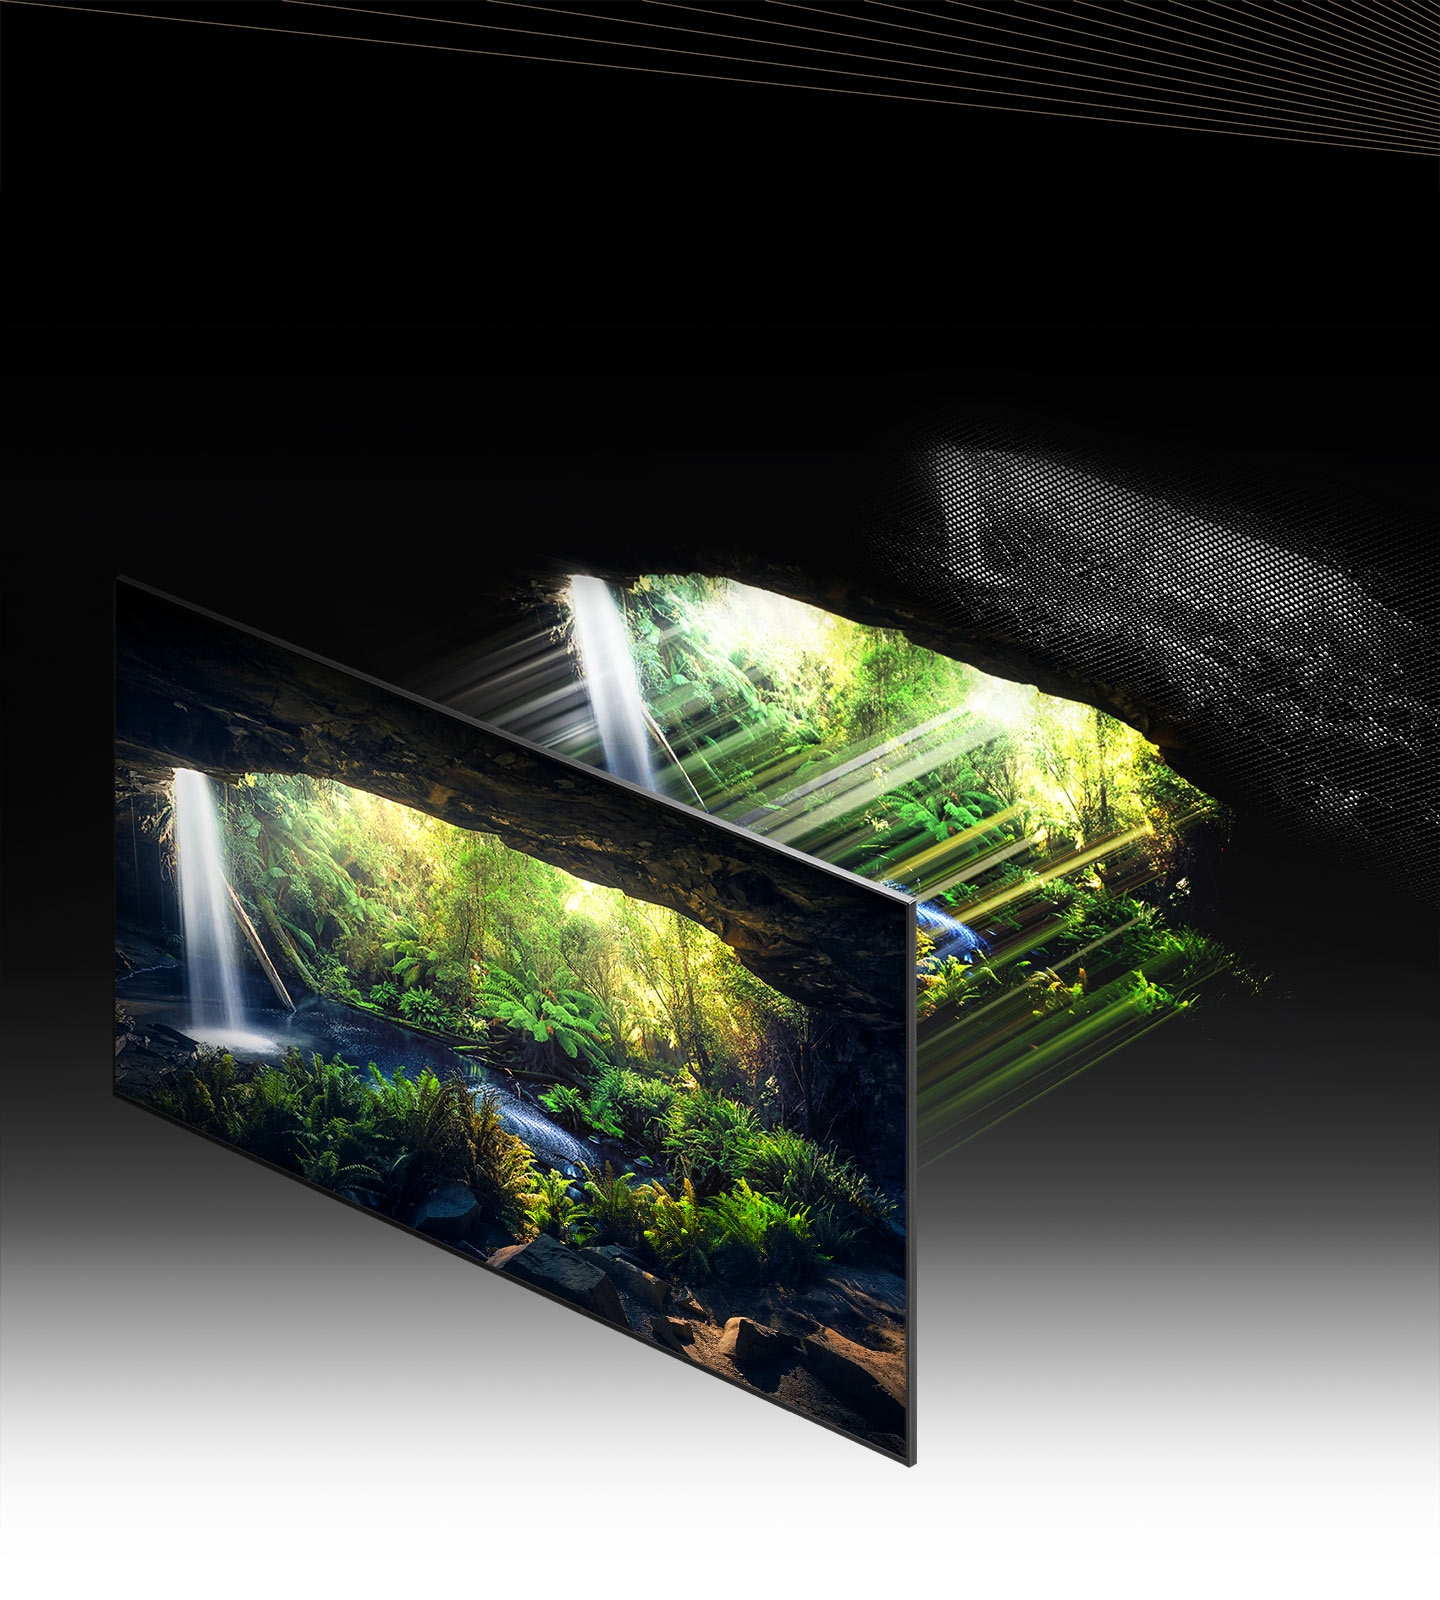 Through the Quantum Mini LED and microlayer, the beautiful forest screen seen from inside a cave is displayed in detail in bright and dark areas, showing very clearly.